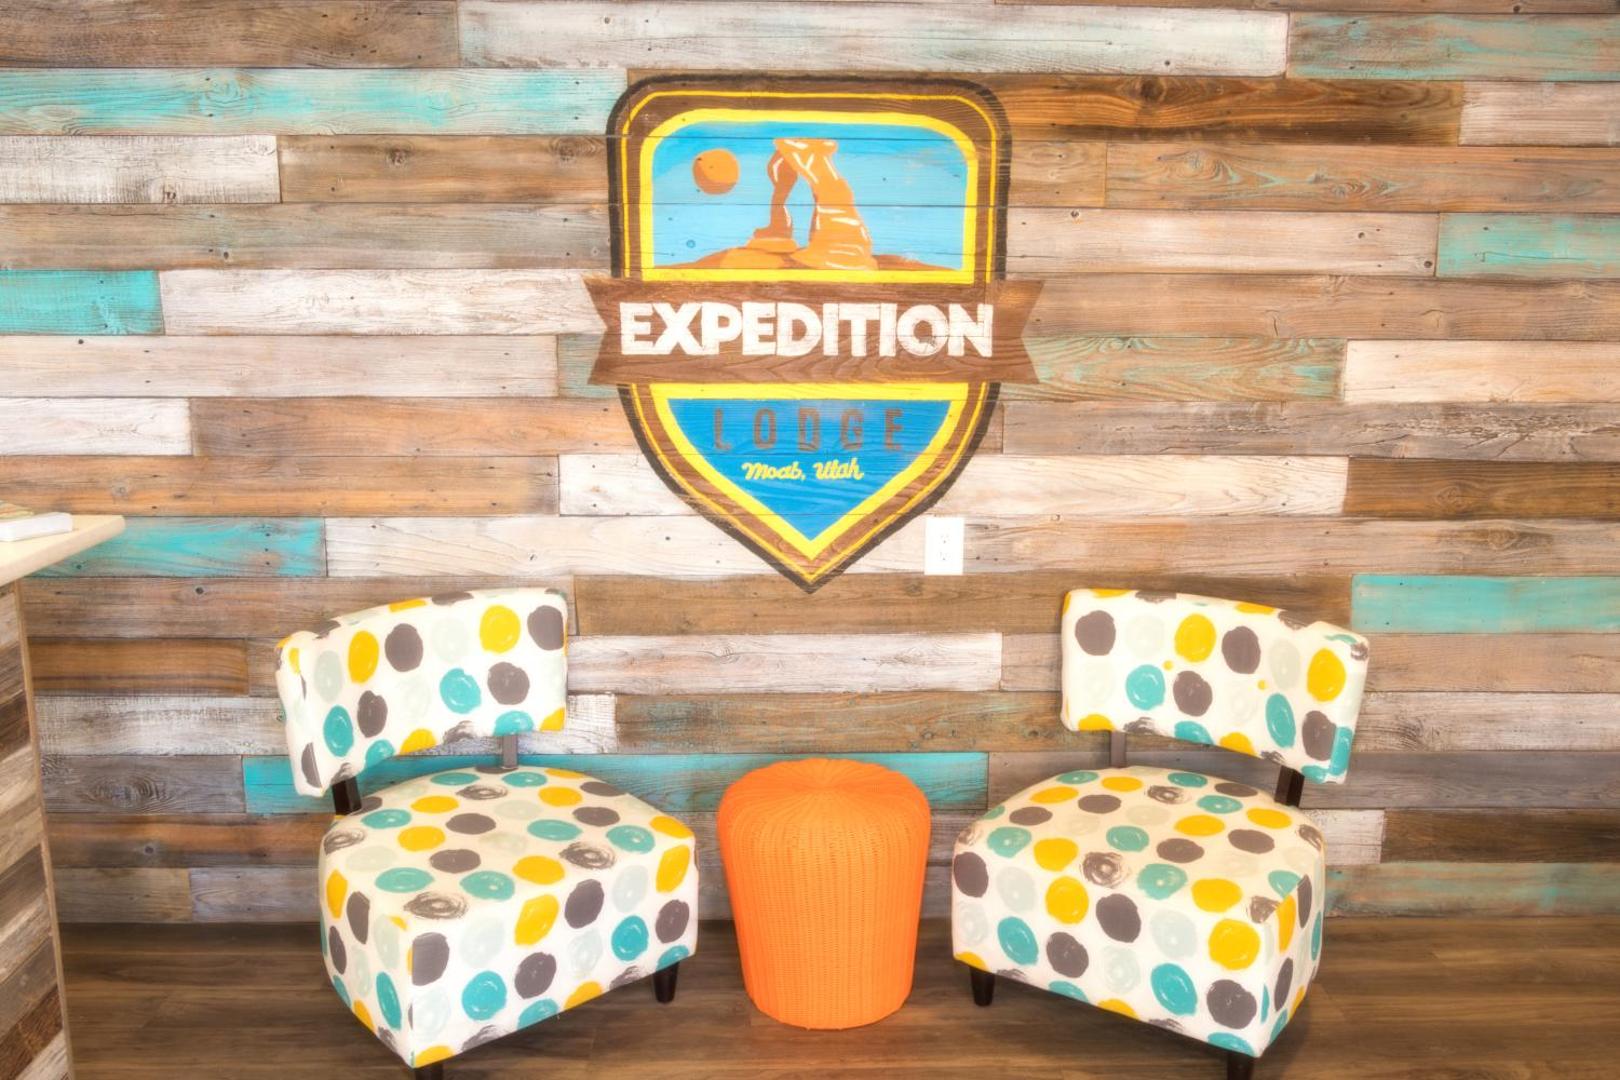 Expedition Lodge